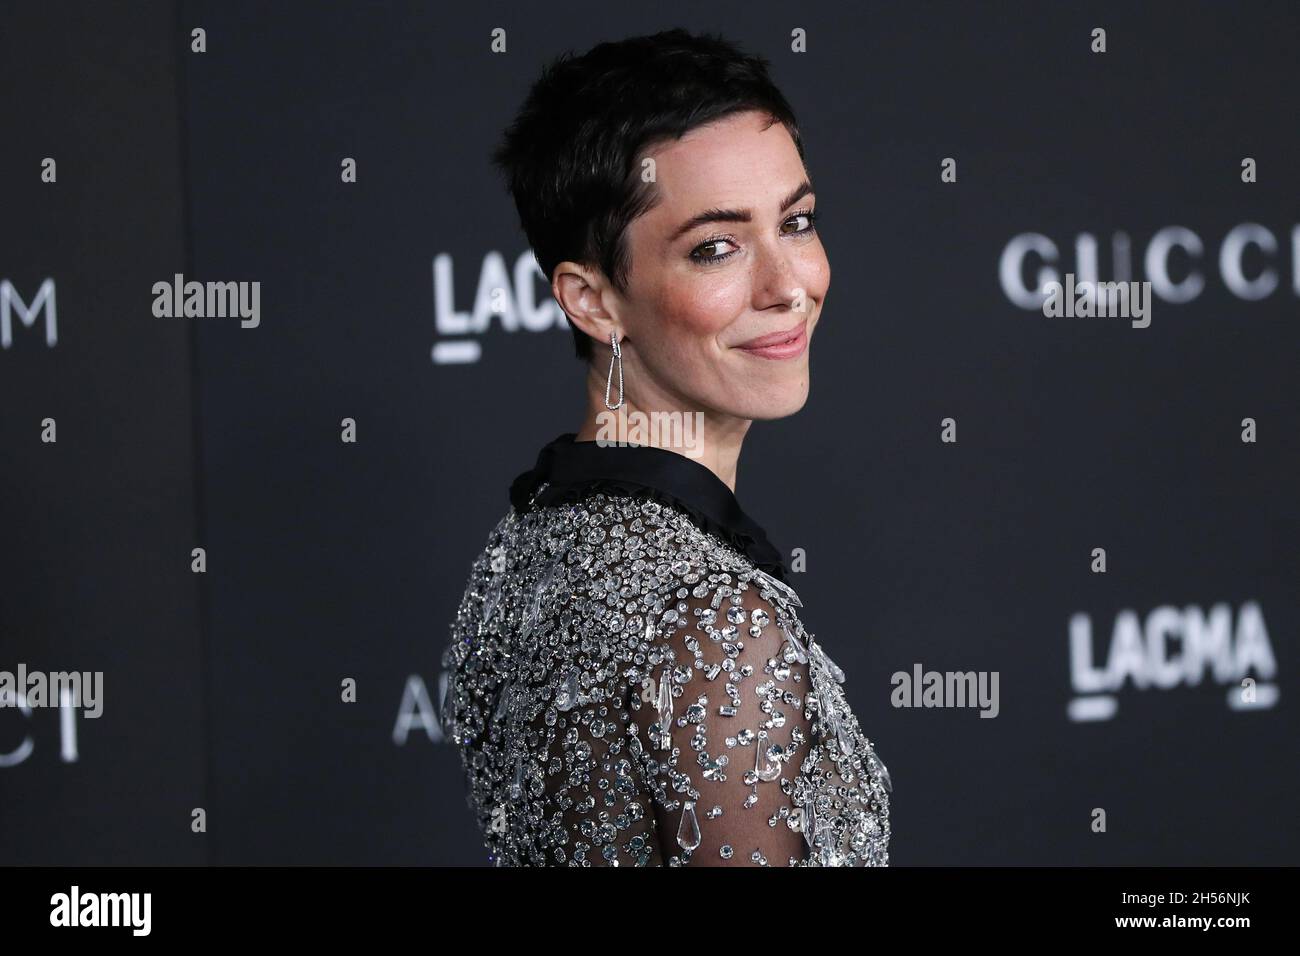 LOS ANGELES, CALIFORNIA, USA - NOVEMBER 06: Actress Rebecca Hall wearing a Miu Miu dress arrives at the 10th Annual LACMA Art + Film Gala 2021 held at the Los Angeles County Museum of Art on November 6, 2021 in Los Angeles, California, United States. (Photo by Xavier Collin/Image Press Agency) Stock Photo